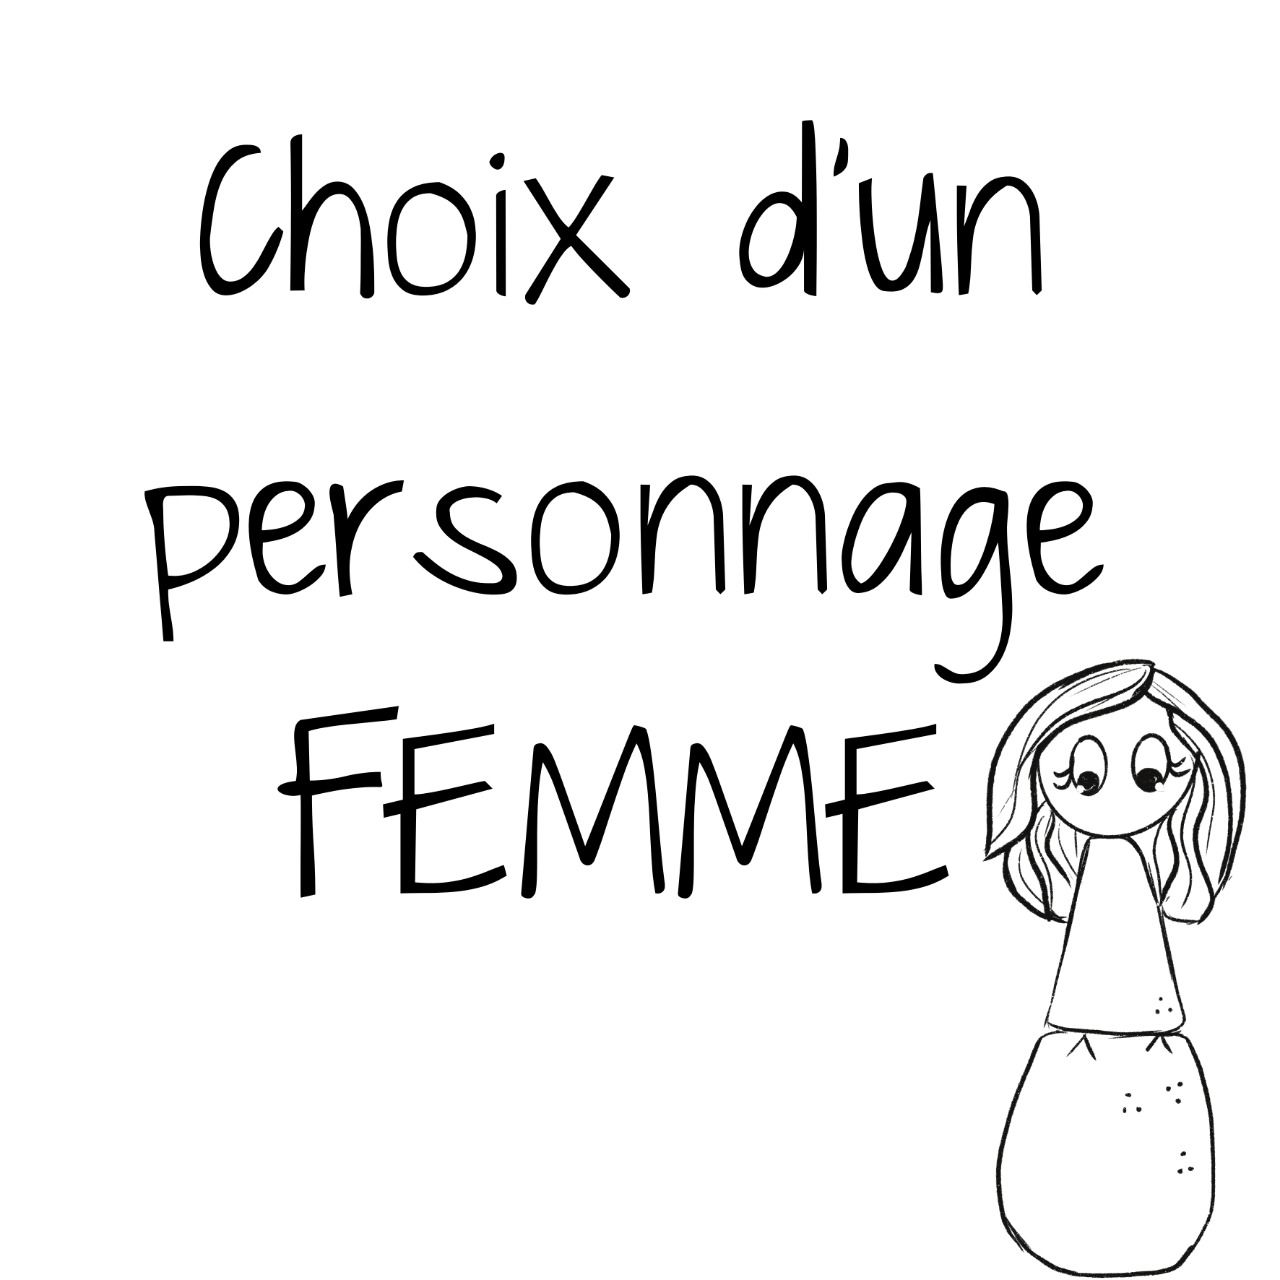 Personnage femme